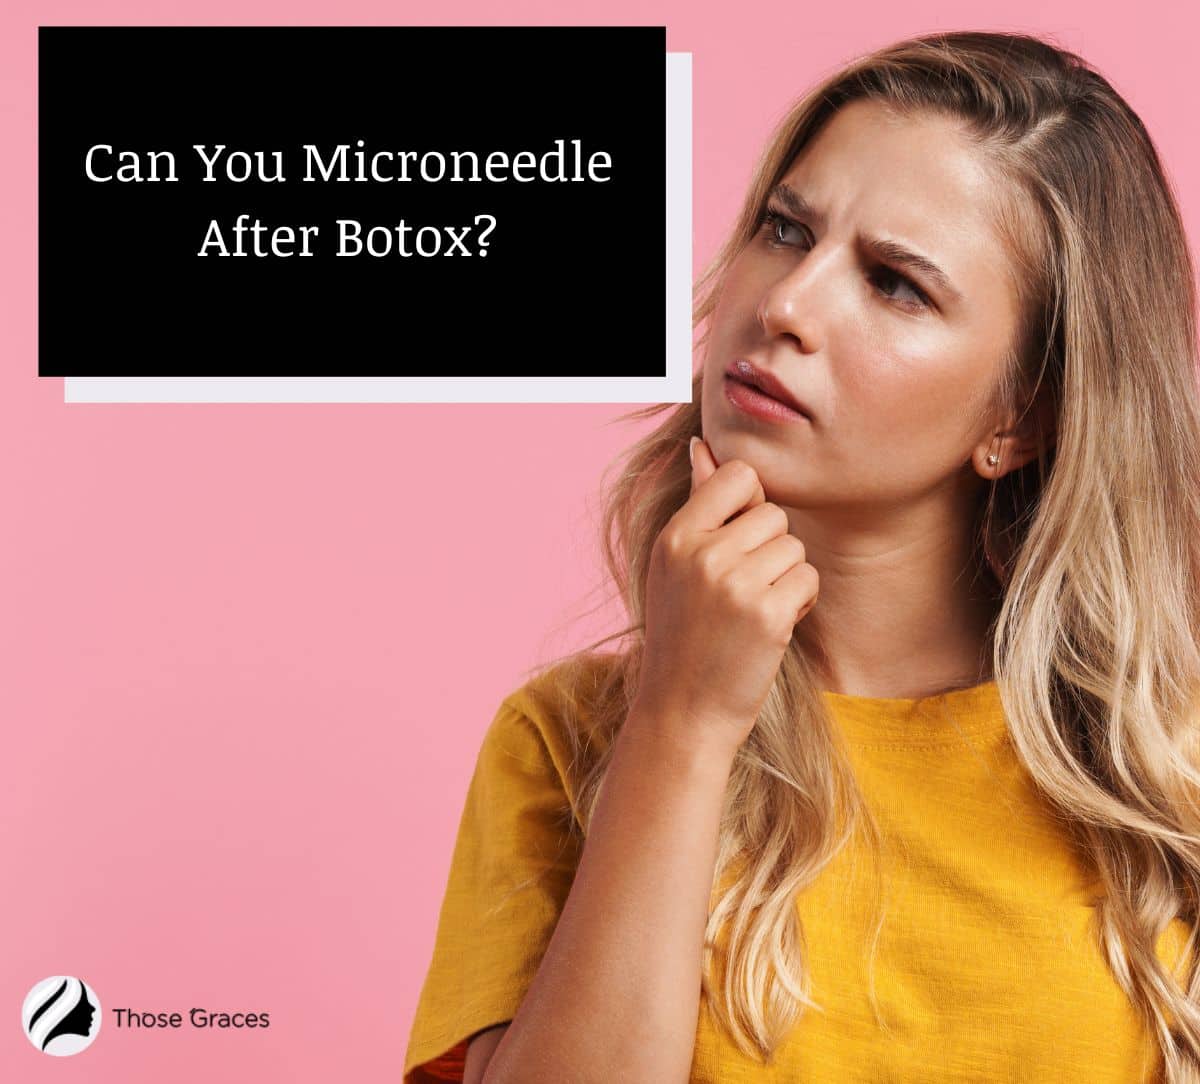 lady thinking if Can You Microneedle After Botox